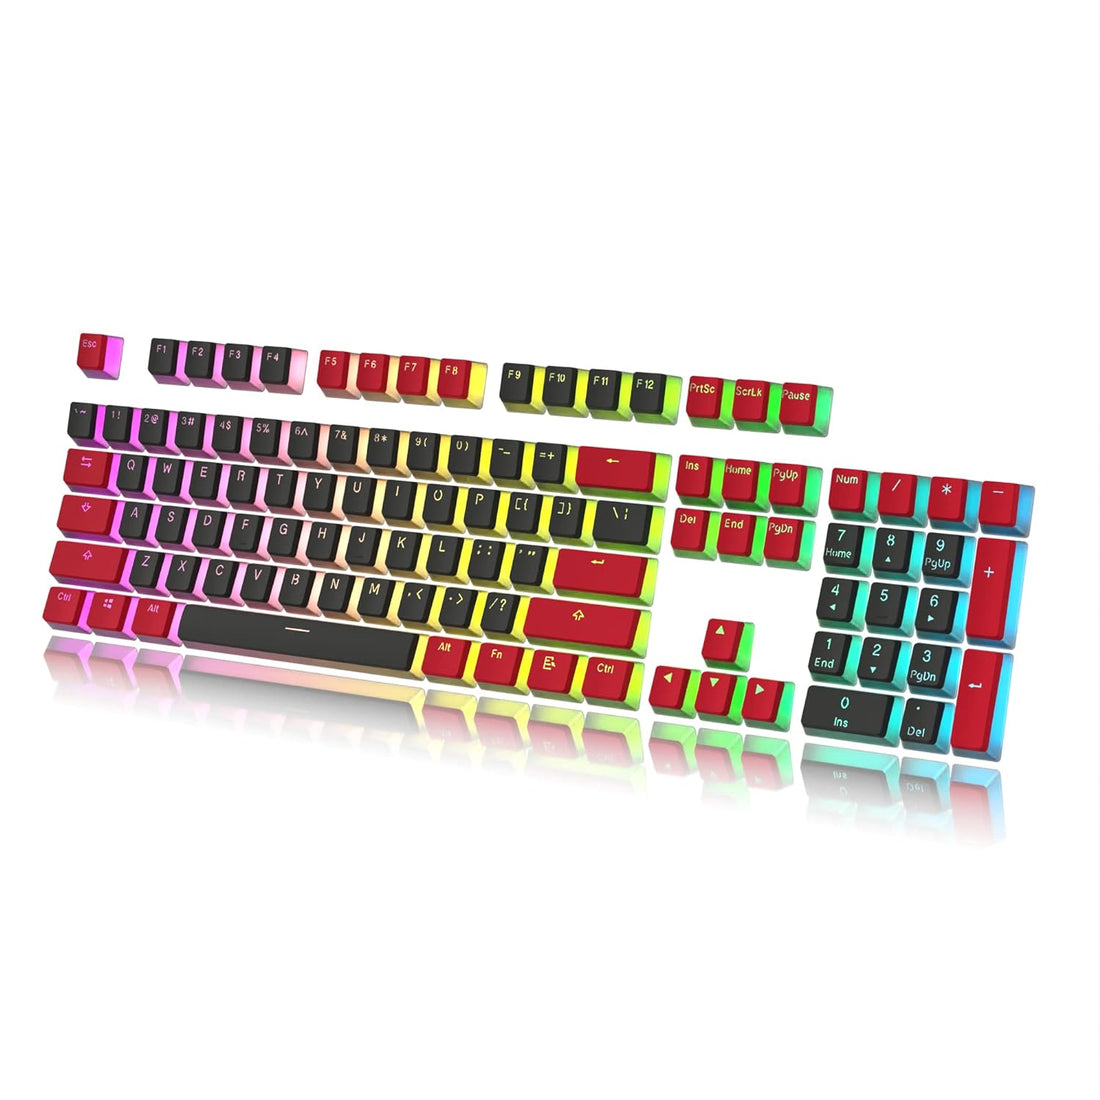 HK Gaming 108 Double Shot PBT Pudding Keycaps Keyset for Mechanical Gaming Keyboard MX Switches (Black & Red)